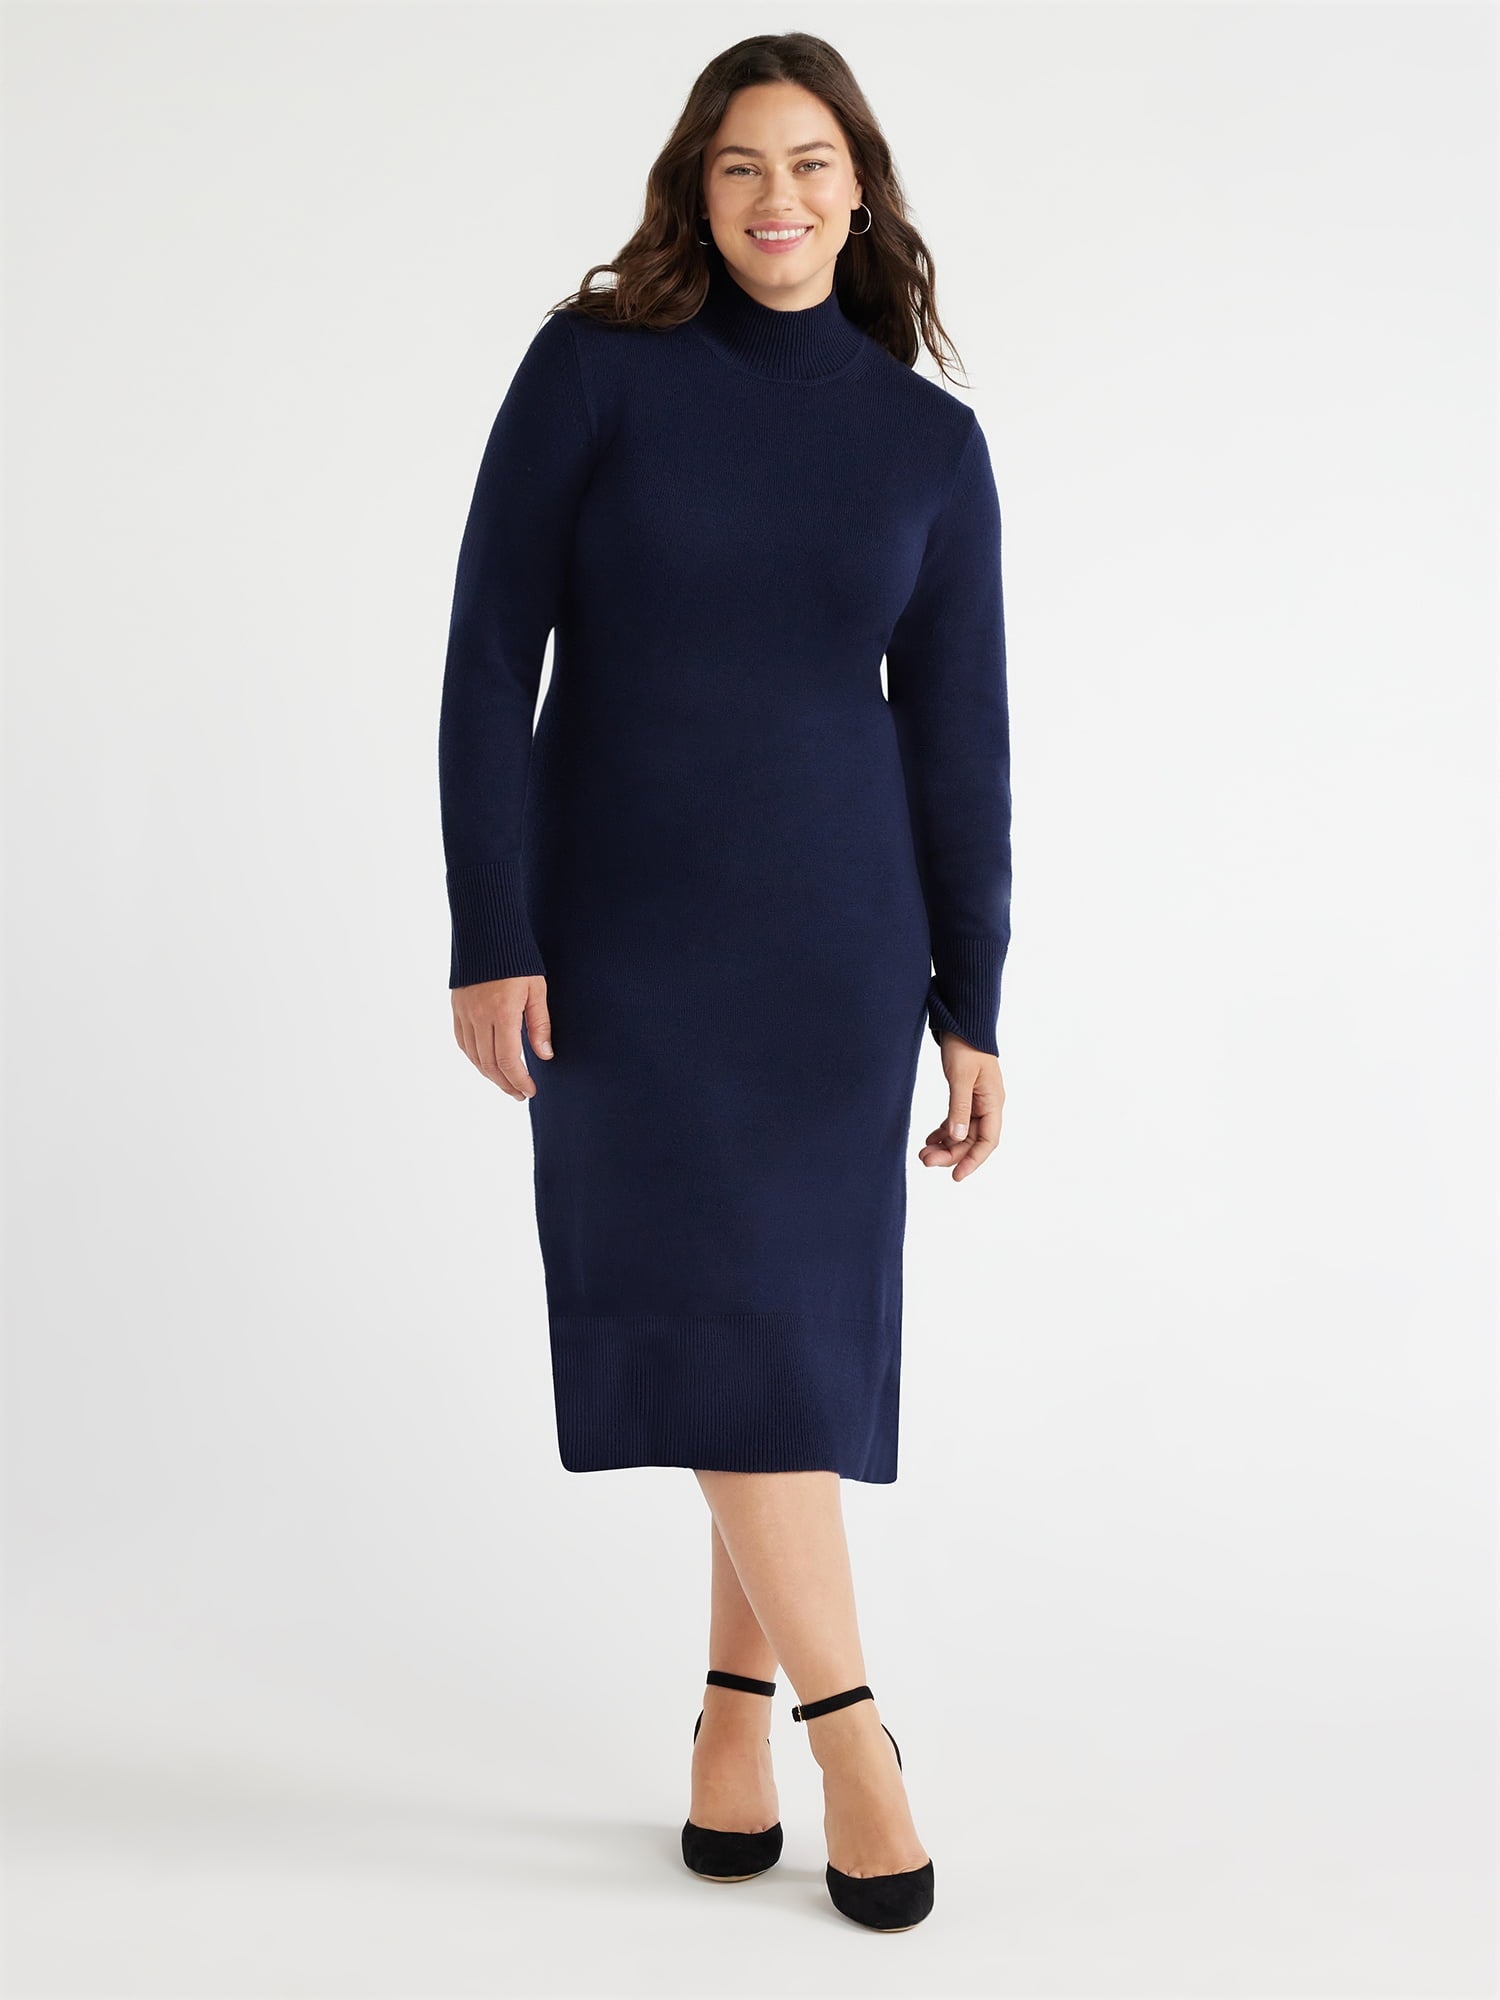 Free Assembly Women’s Turtleneck Sweater Midi Dress with Long Sleeves, Sizes XS-XXXL - image 7 of 10